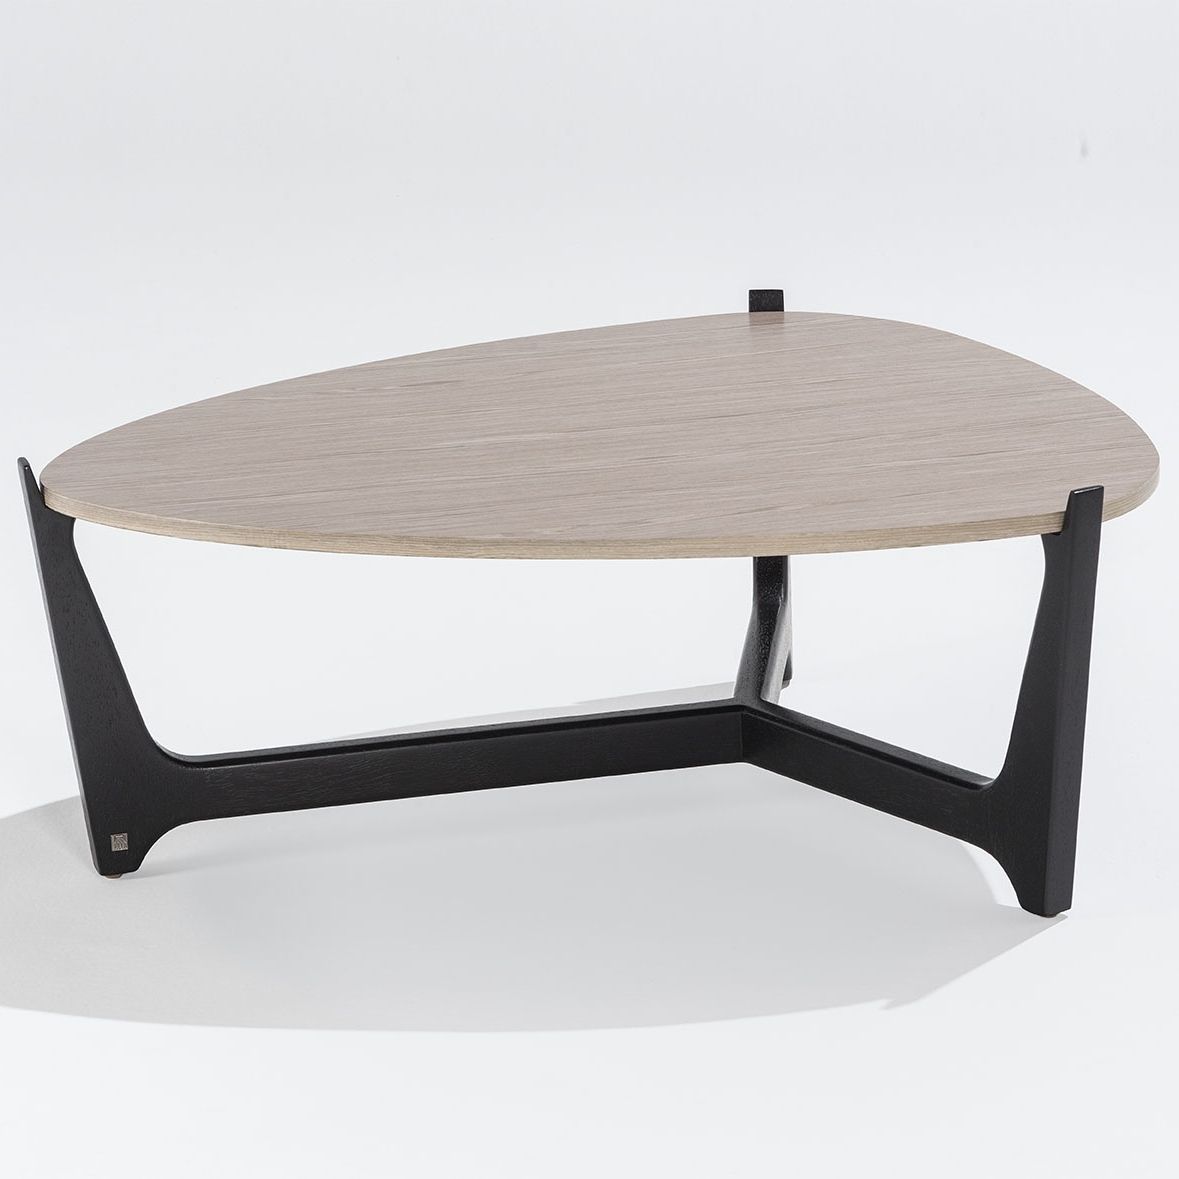 Ten Large Cocktail Table 100/100a /101 (latte Wood Top/insert Glass Regarding Popular Kai Large Cocktail Tables (View 14 of 20)